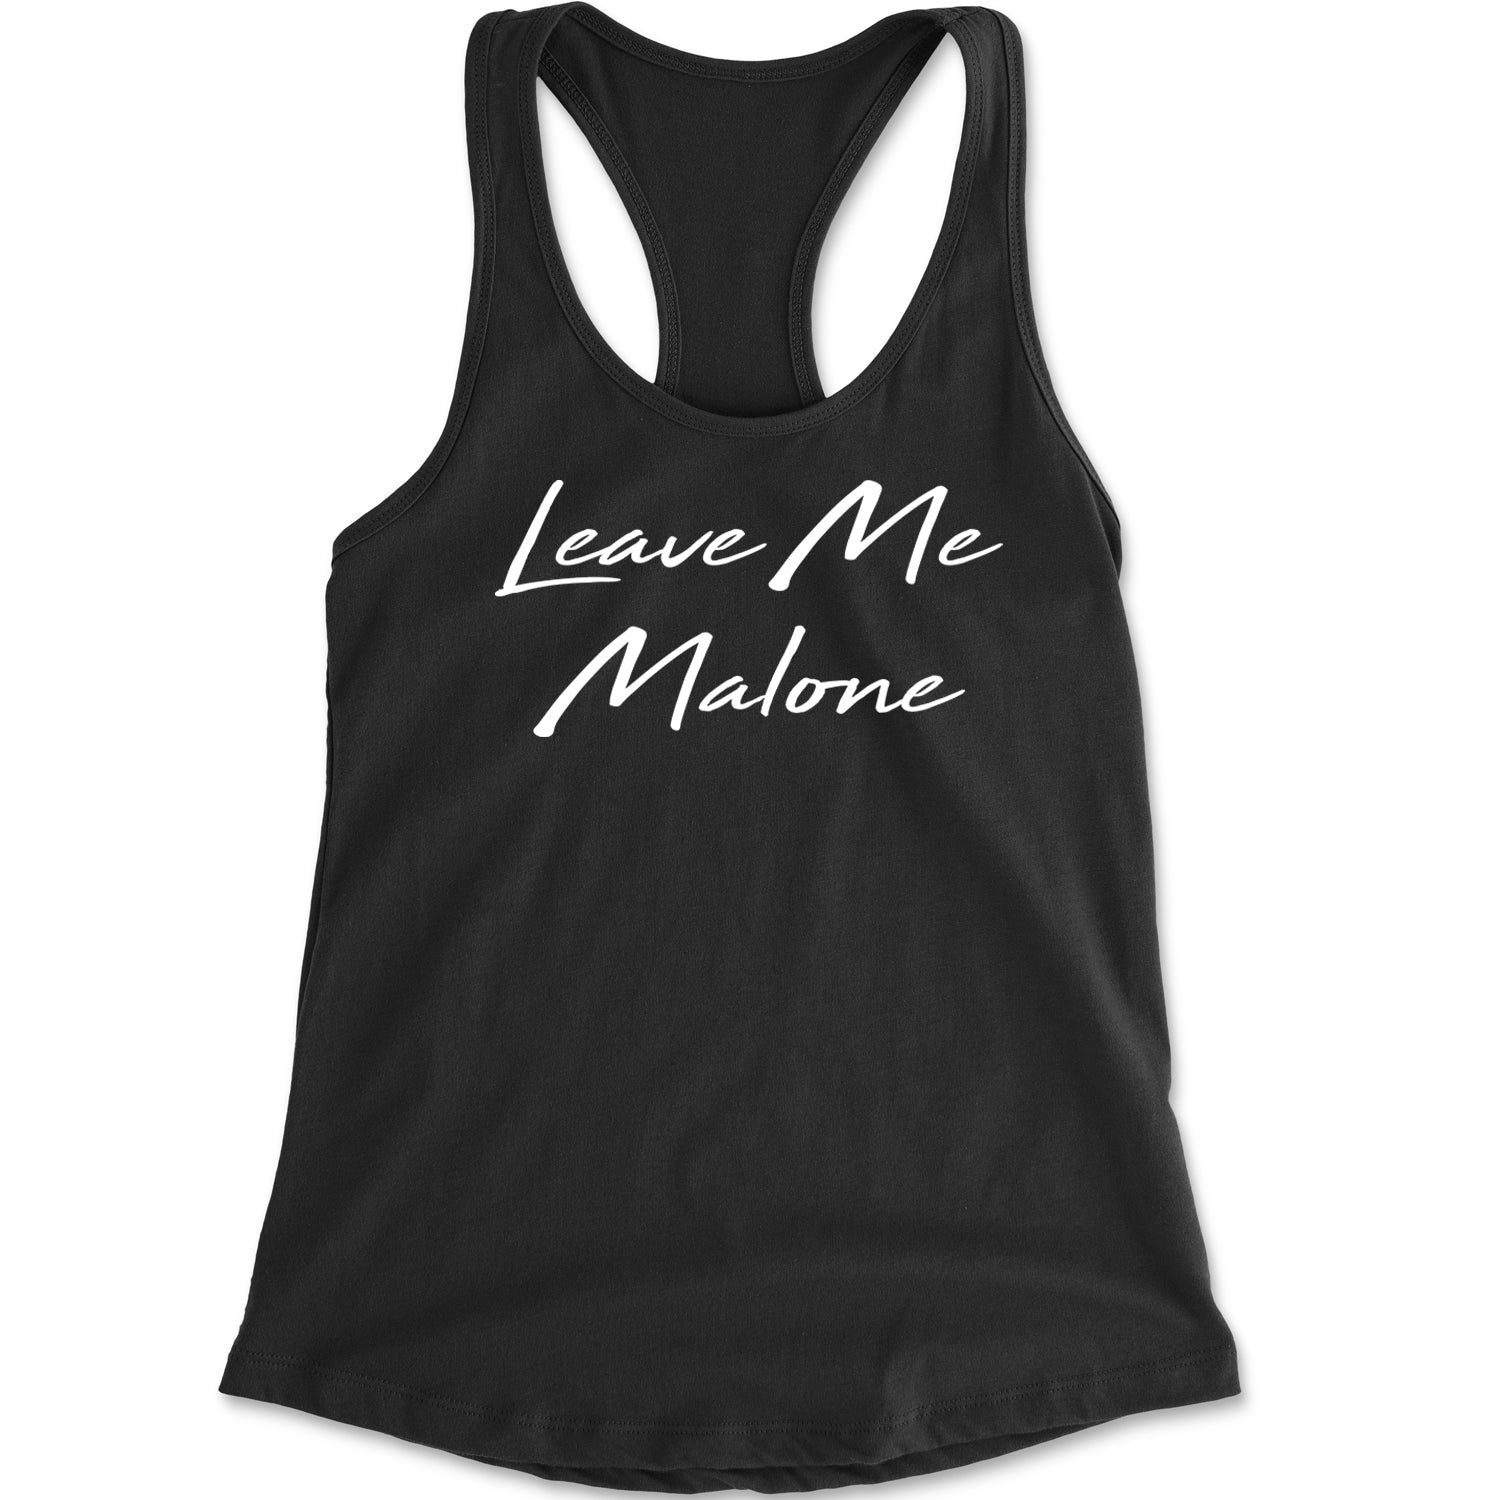 Leave Me Malone I'd Be Crying Rapper Racerback Tank Top for Women